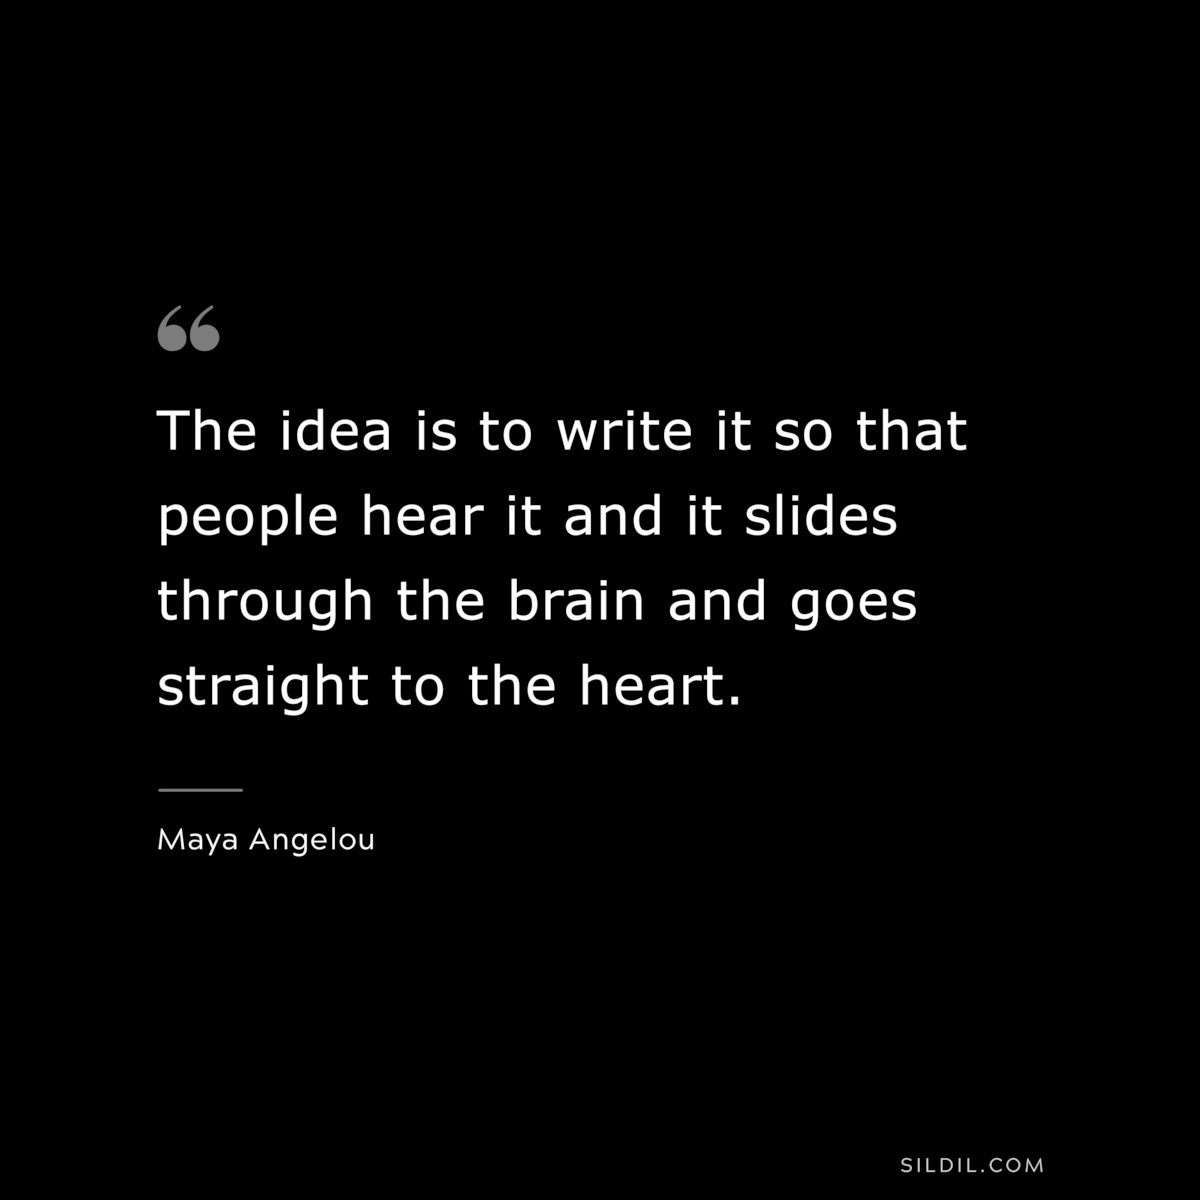 The idea is to write it so that people hear it and it slides through the brain and goes straight to the heart. ― Maya Angelou